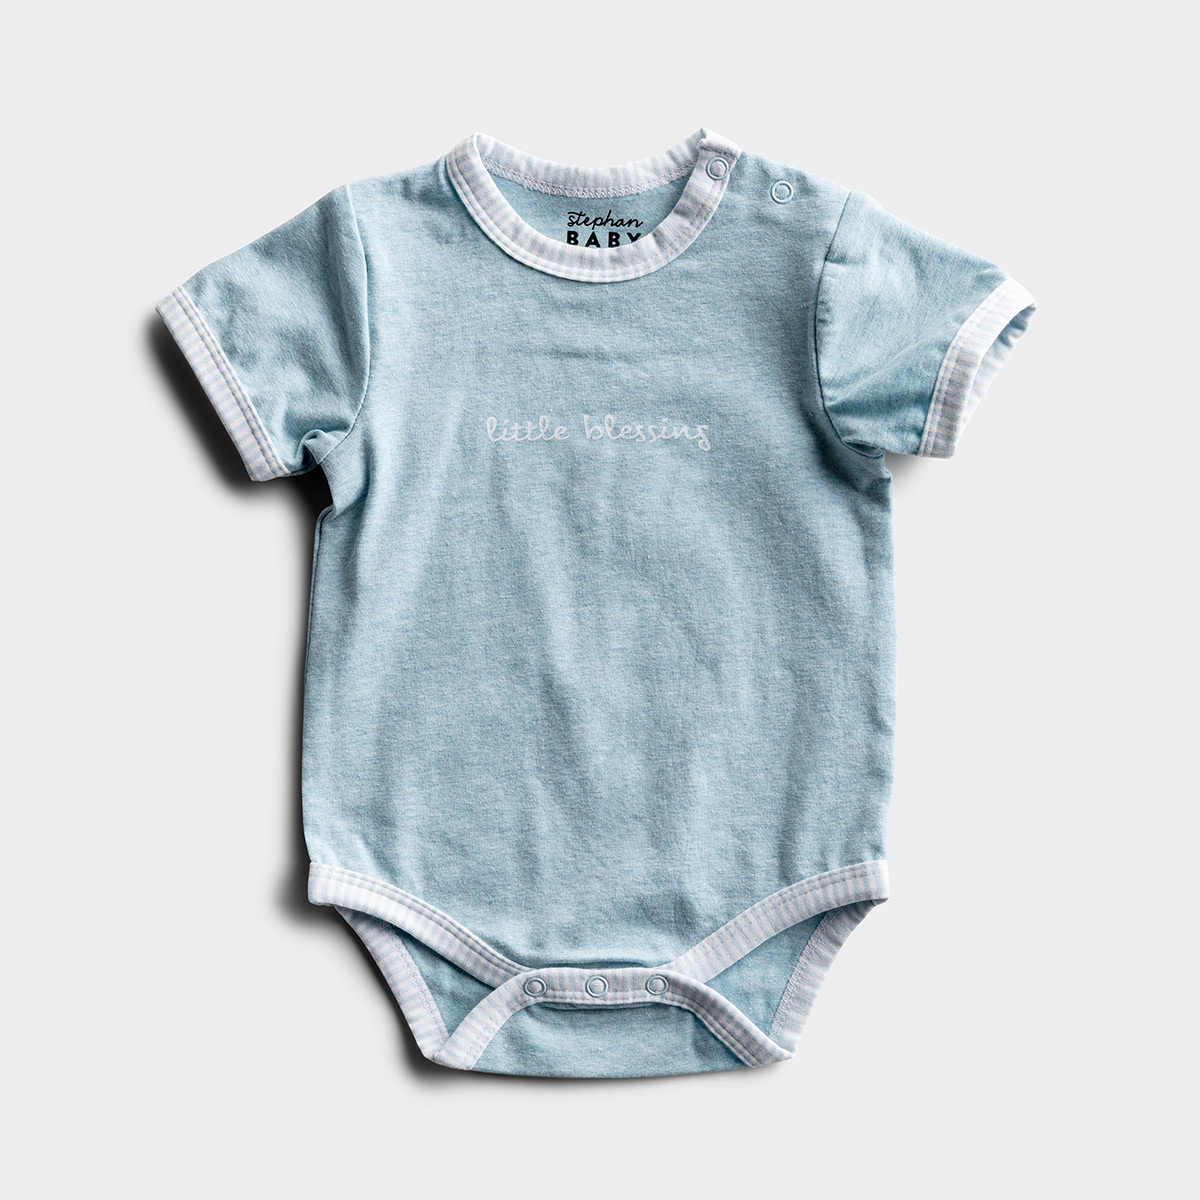 This 'Little Blessing' inspirational baby bodysuit is designed to dress precious little ones in adorable style and meaningful inspiration. This blue, baby one-piece, with blue-striped accents, snaps at neck and bottom for easy dressing and shares a sweet 